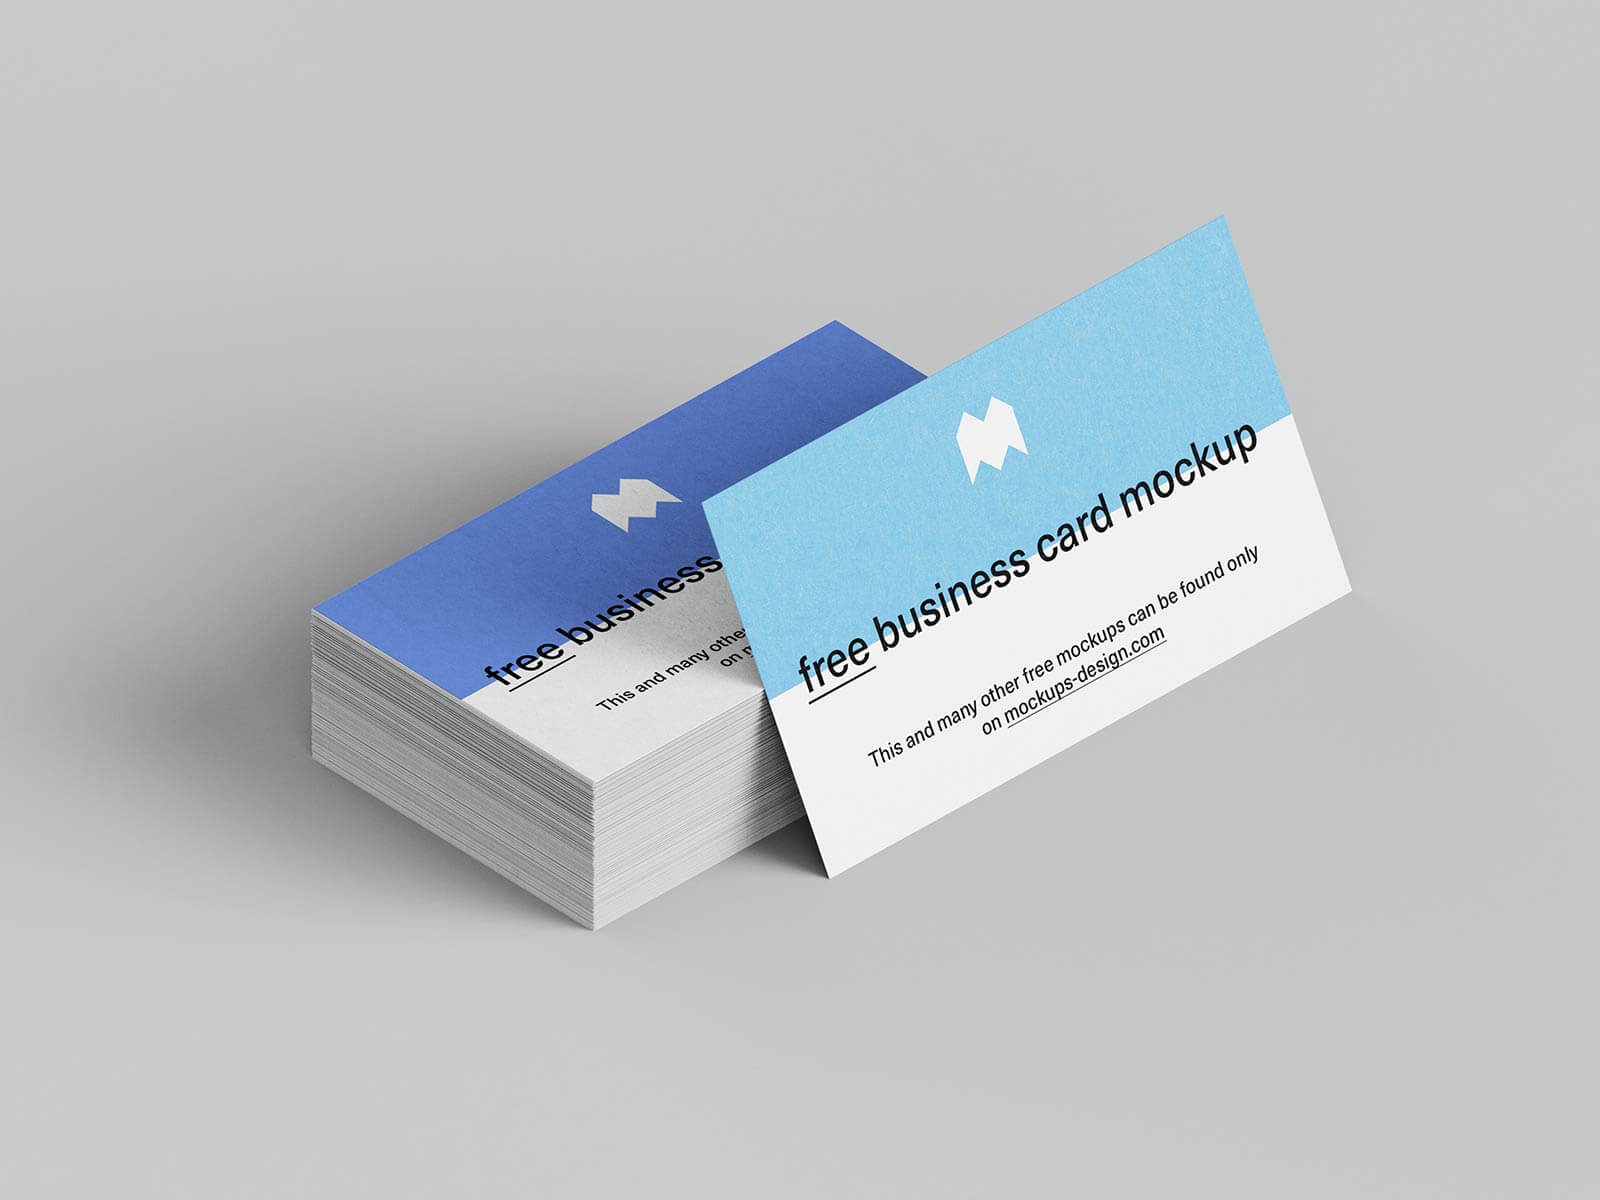 Free 3.5 x 2 Inches Business Card Mockup PSD Set